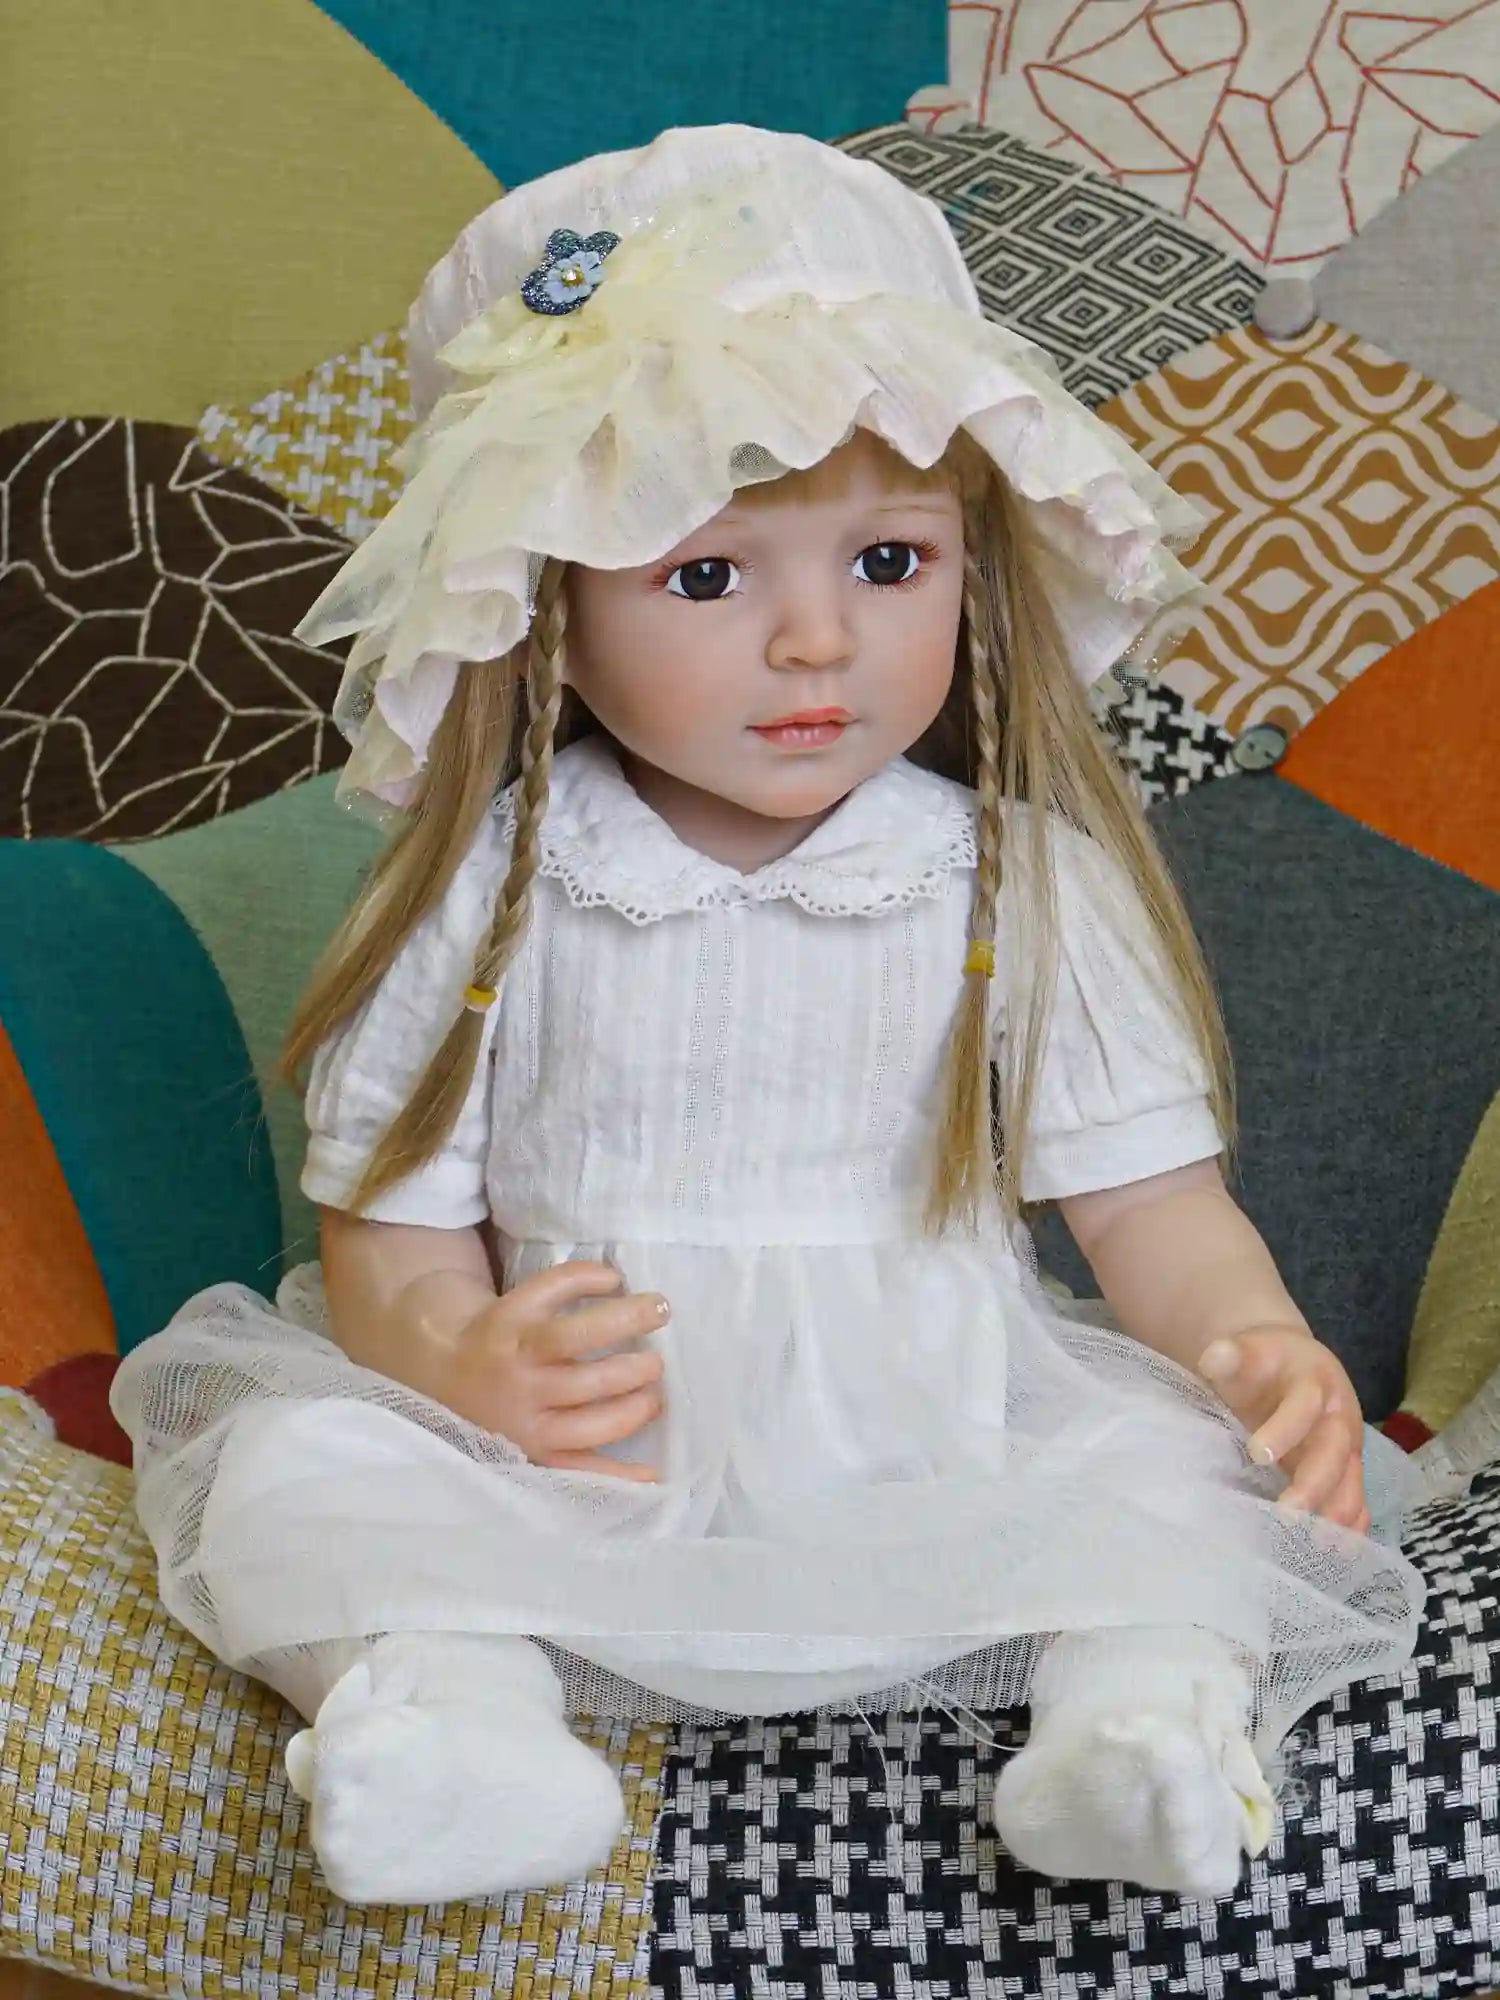 Lifelike reborn doll with light brown braided hair, wearing a white vintage-style dress and a delicate yellow sunhat, sitting on a grey armchair.